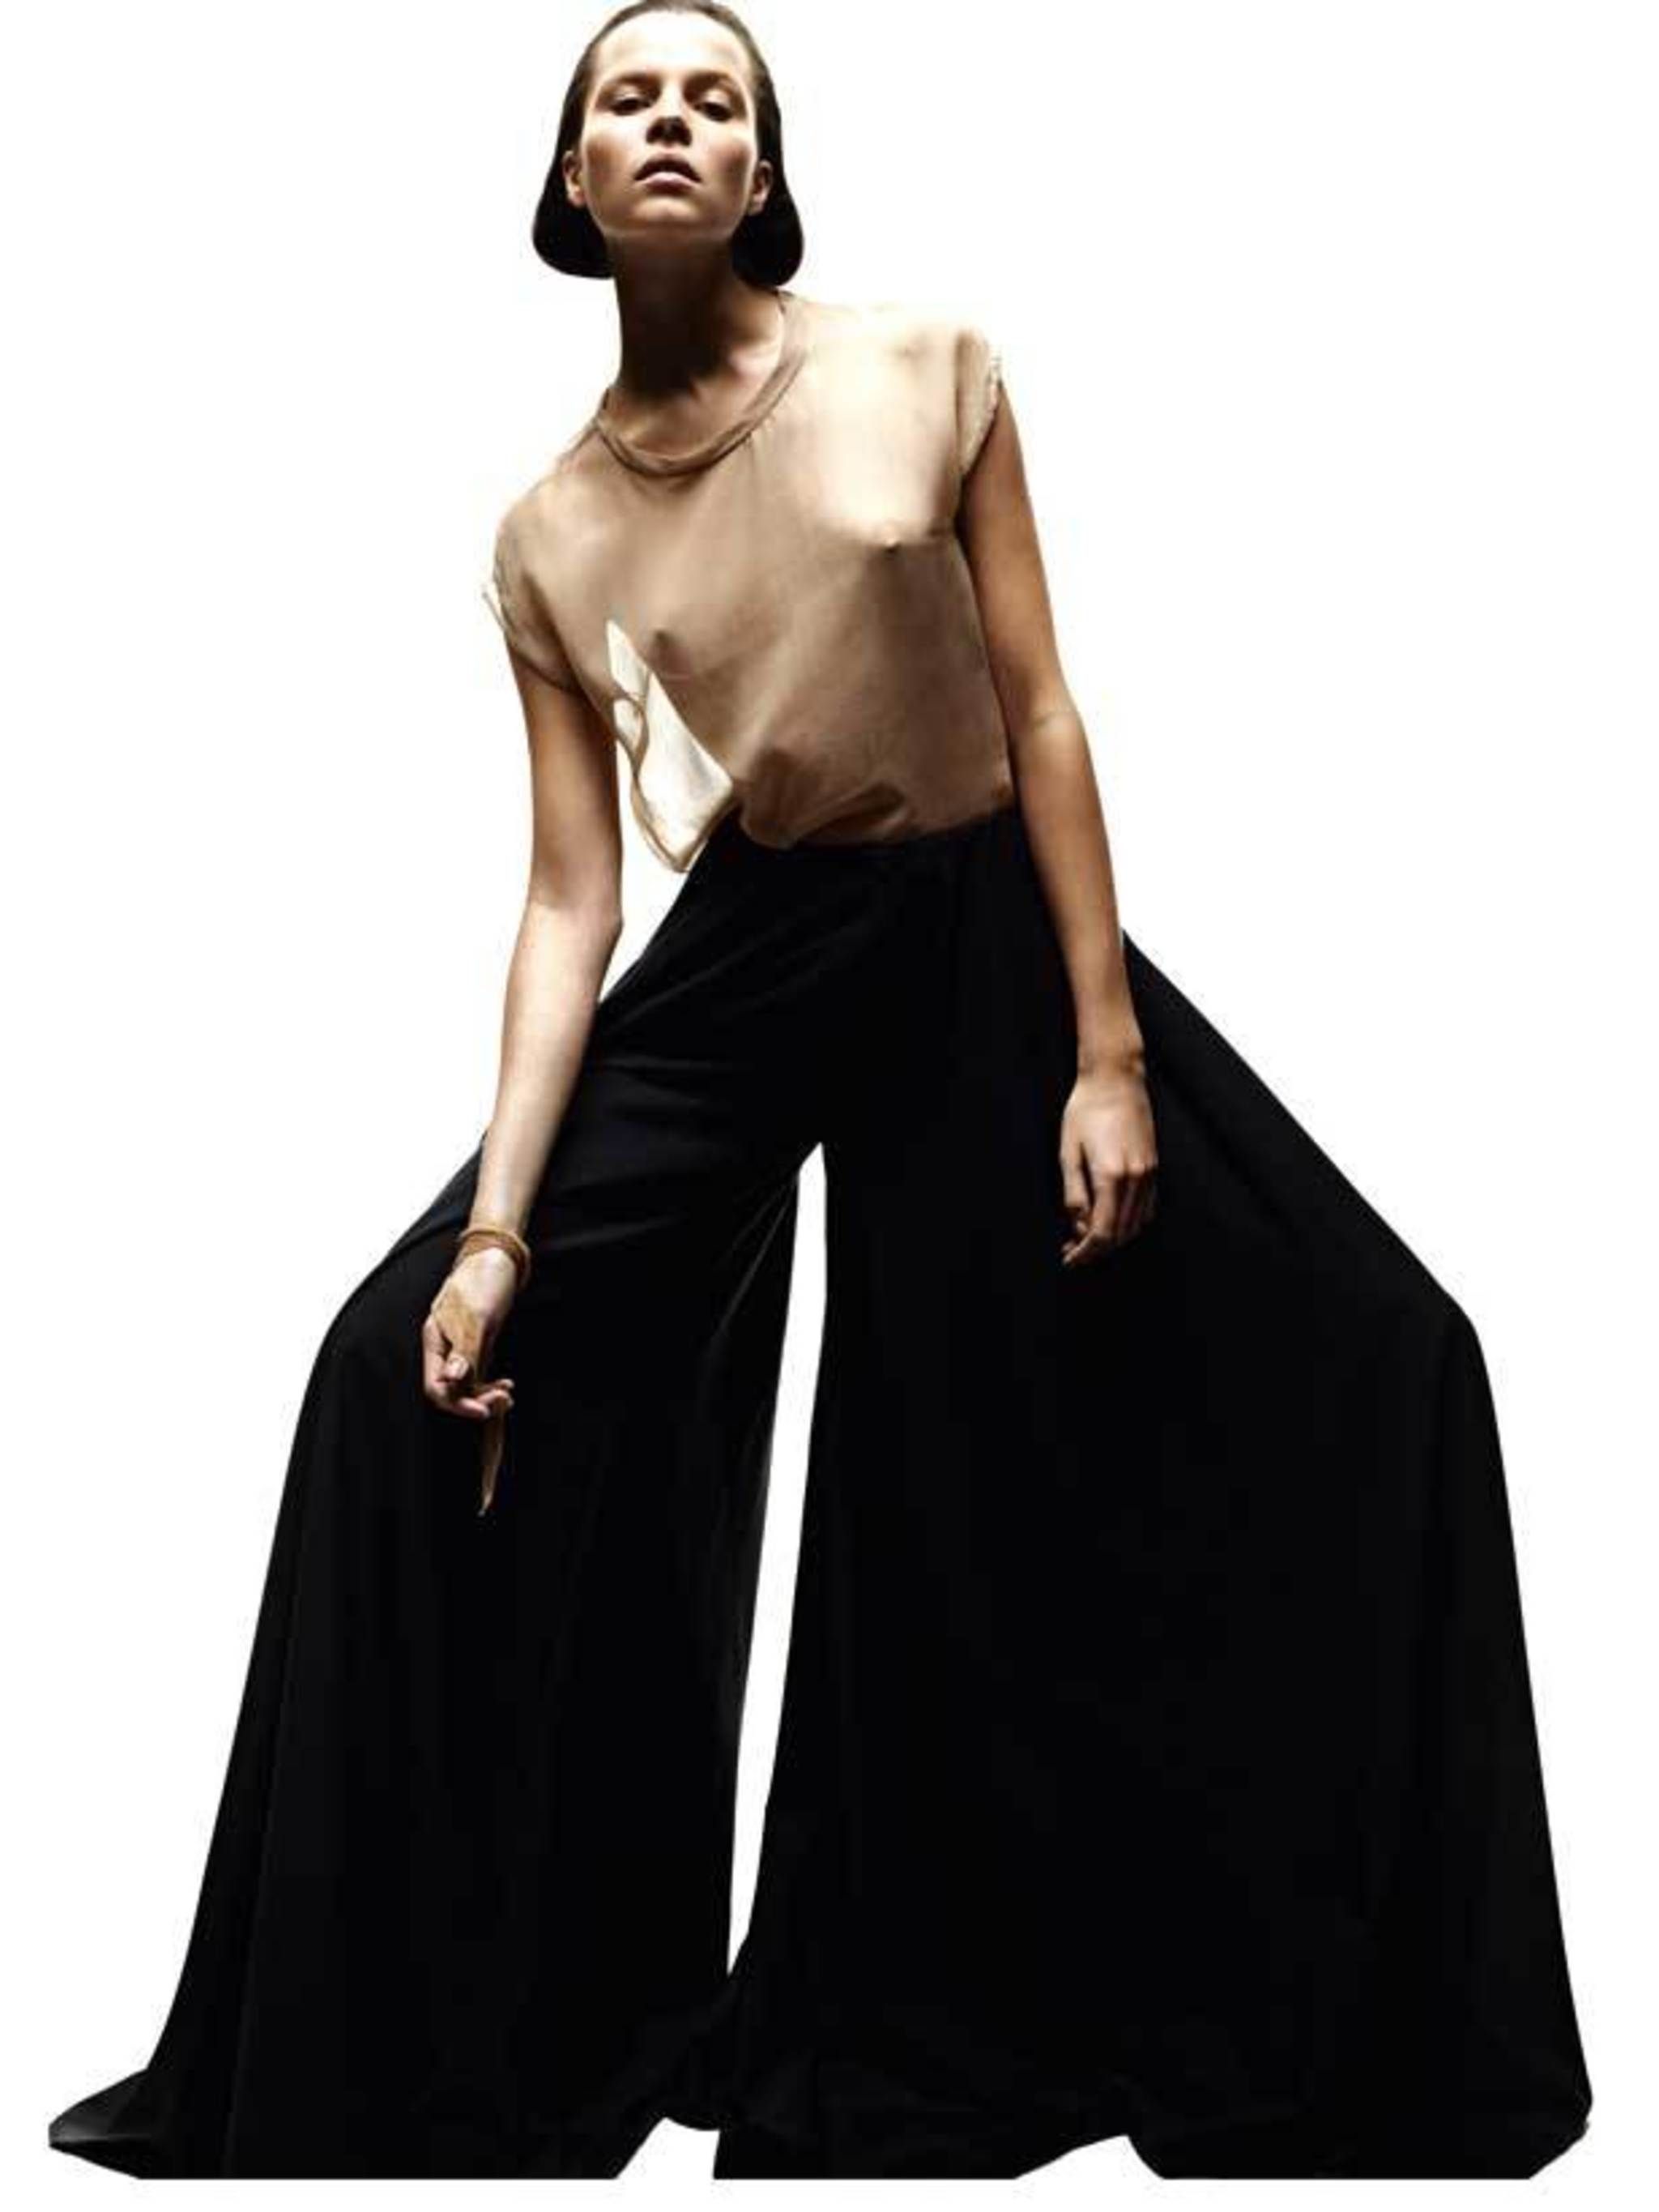 Where can I buy the best cheap palazzo pants? - Quora